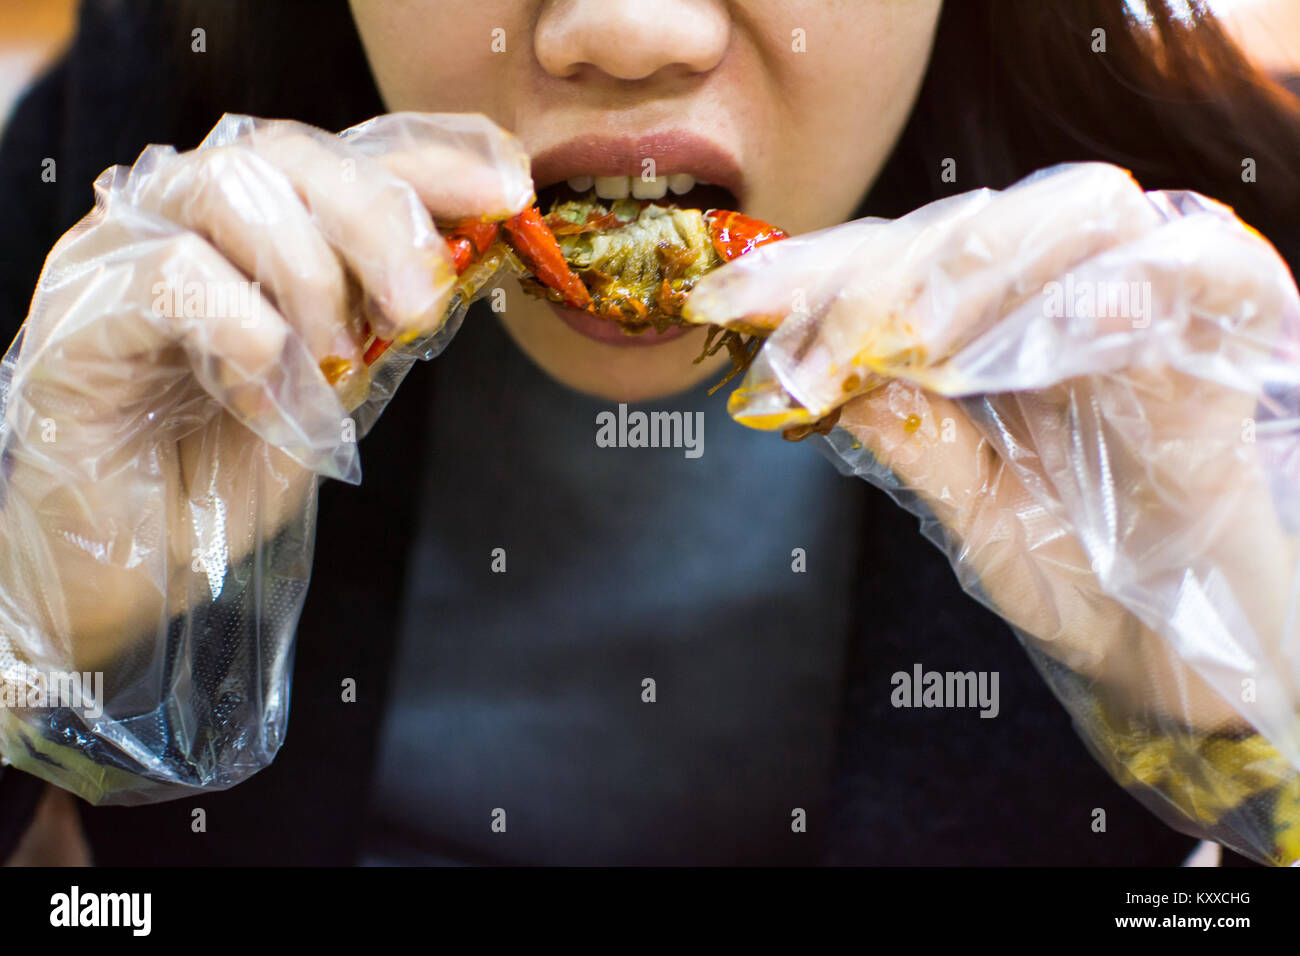 Asian woman eating a crayfish with plastic gloves Stock Photo